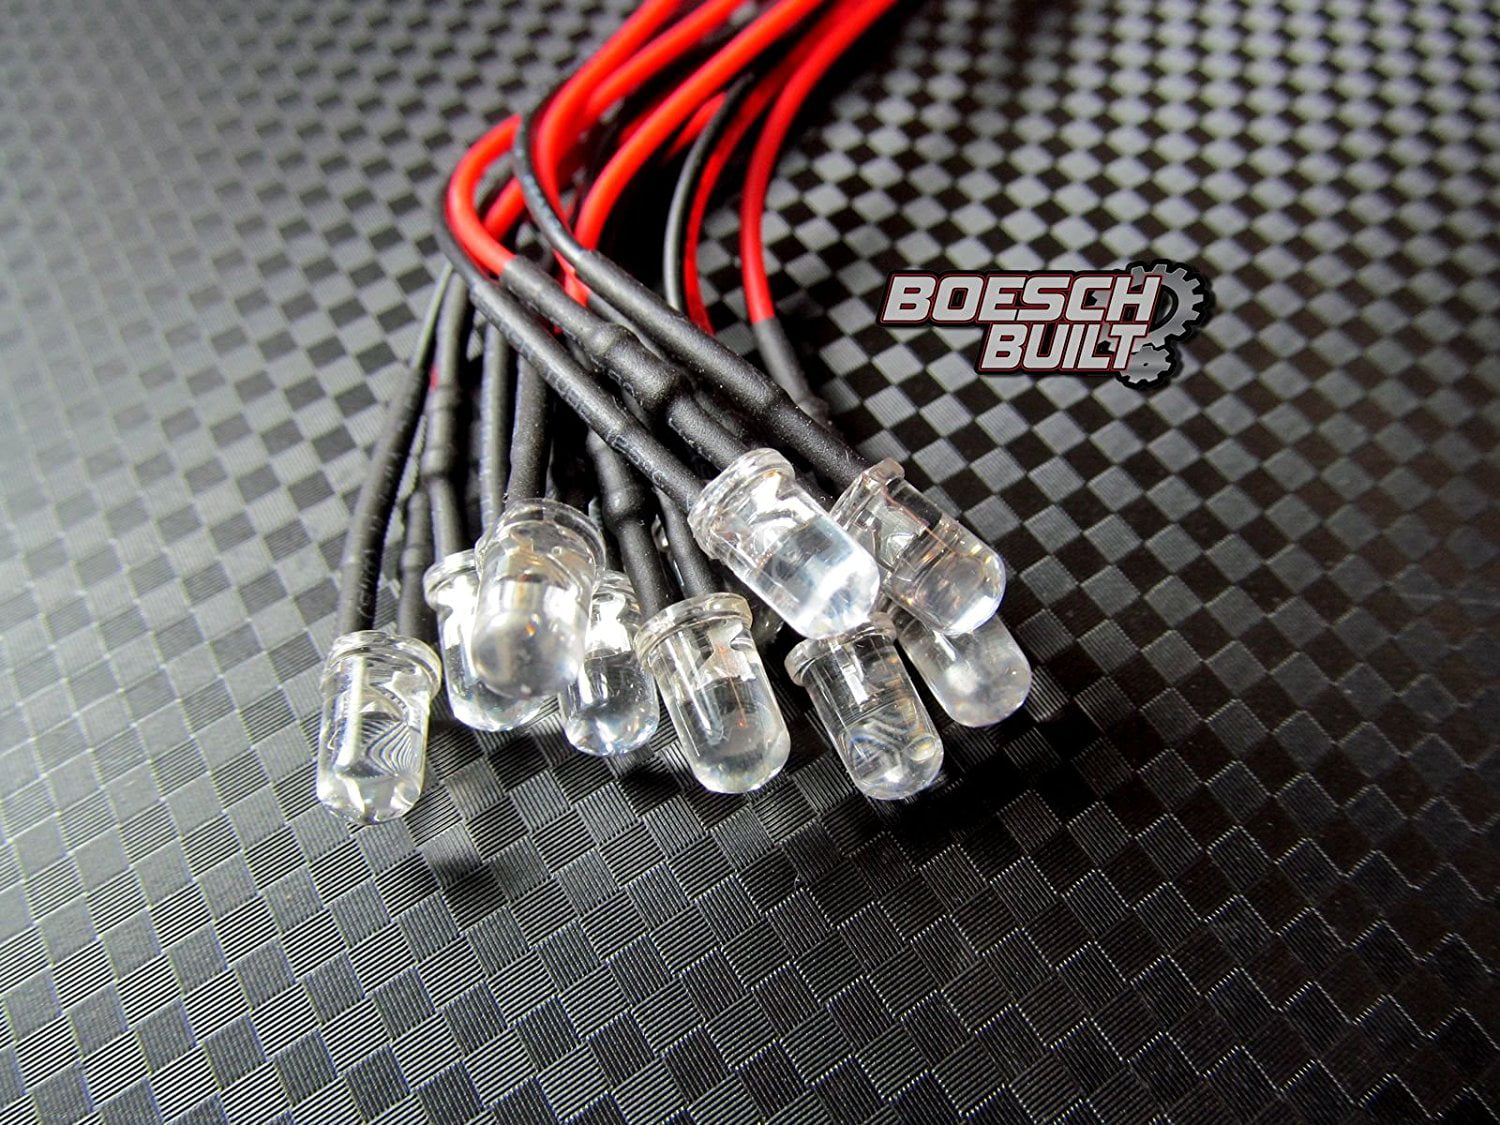 LOT OF 10 HO & N SCALE 3 MM PRE-WIRED LED LIGHT 12 VOLTS BLUE 